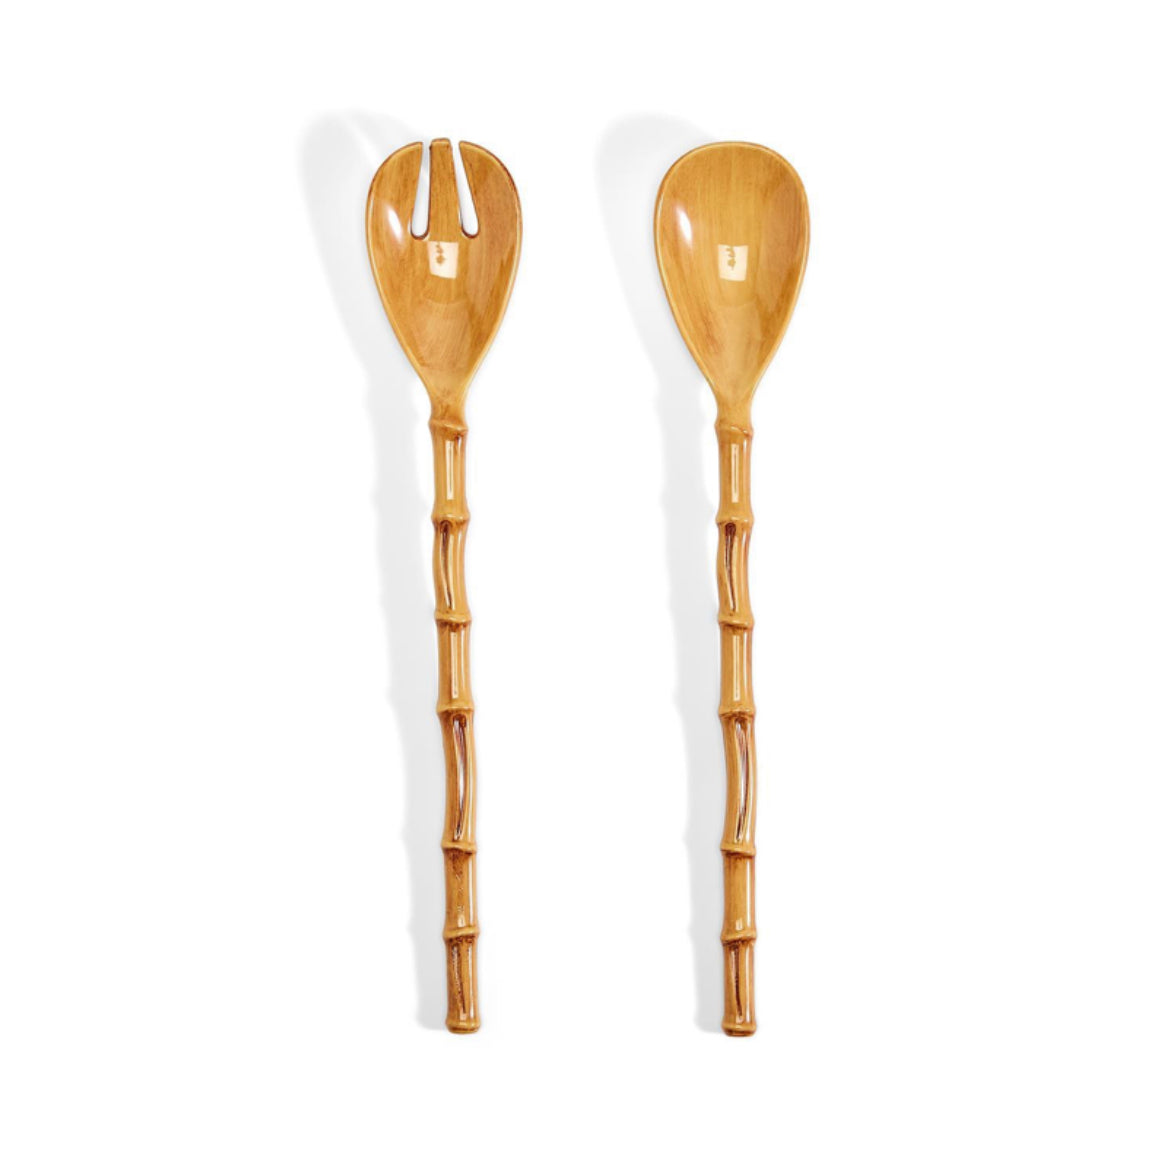 Bamboo Serving Spoons